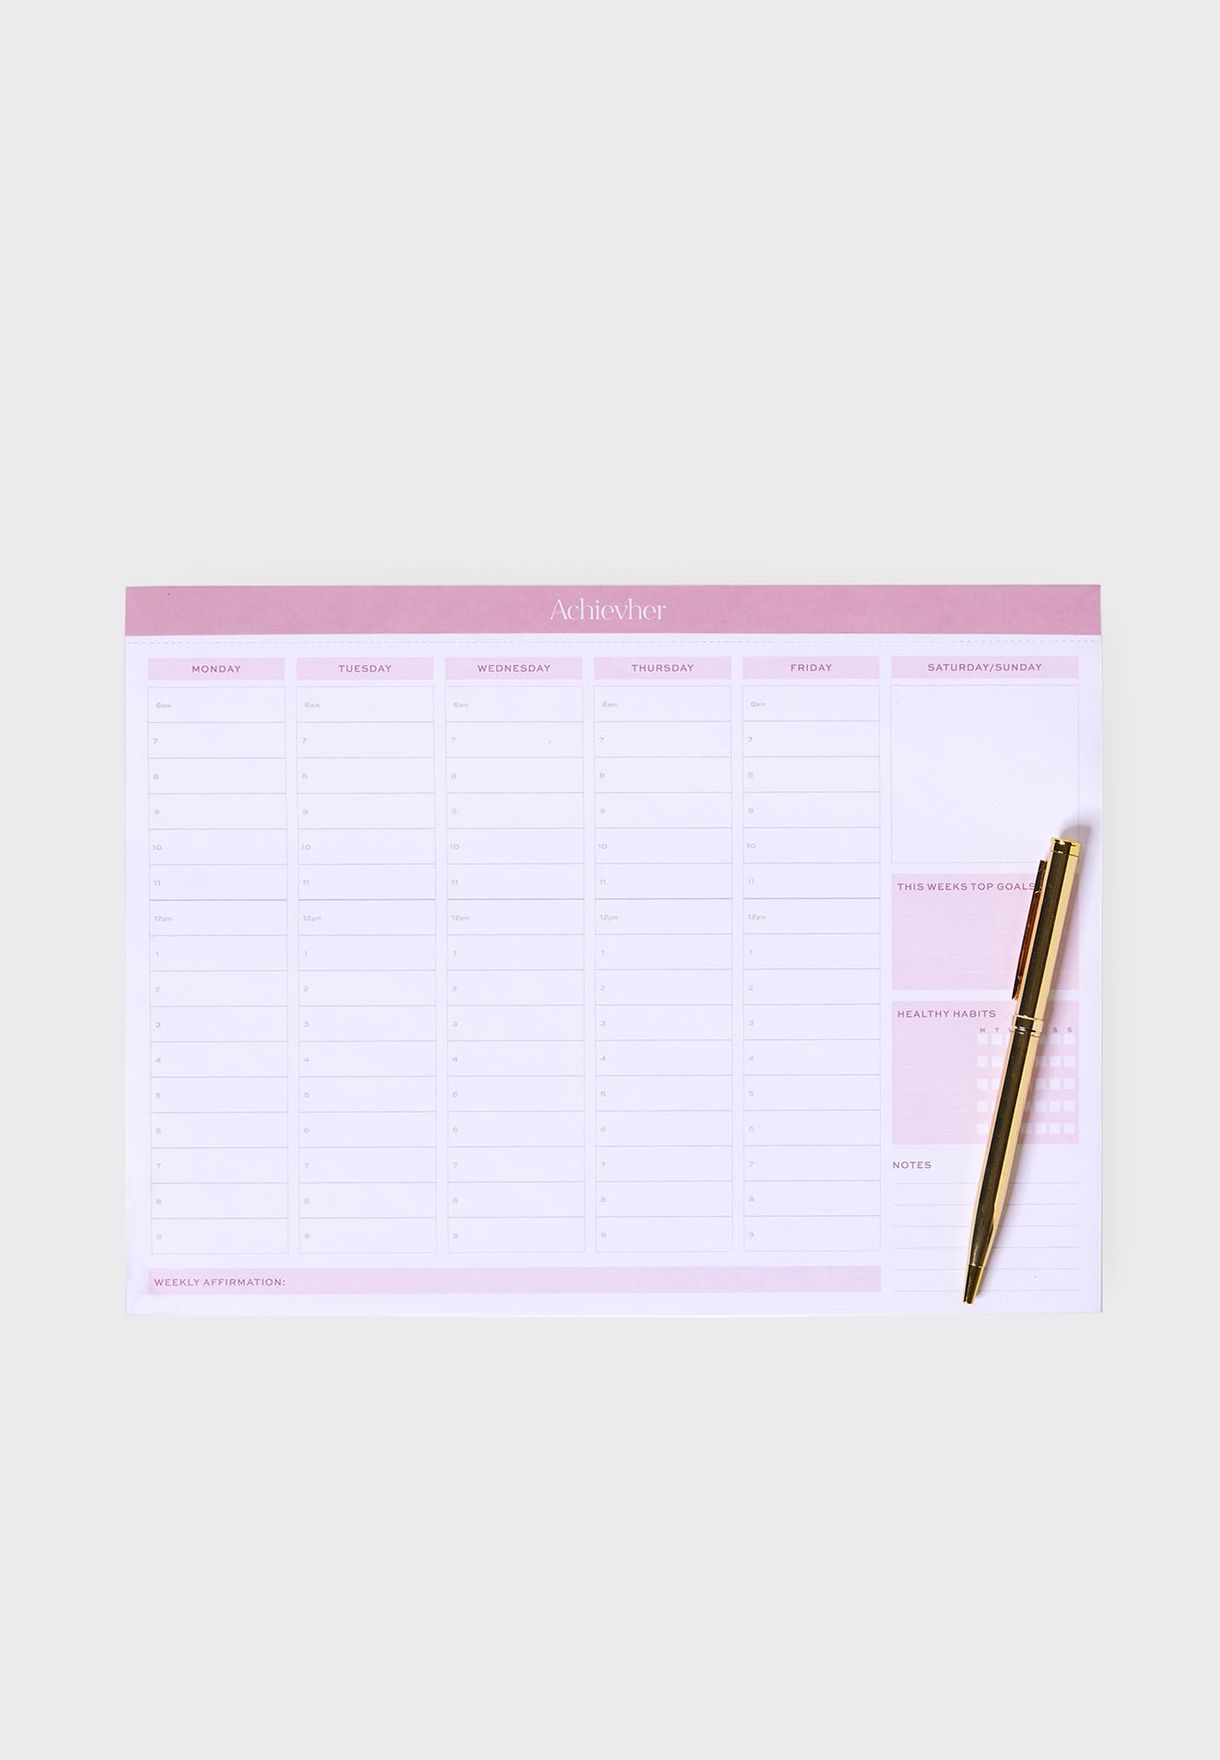 Achievher A4 Affirmation Weekly Planner